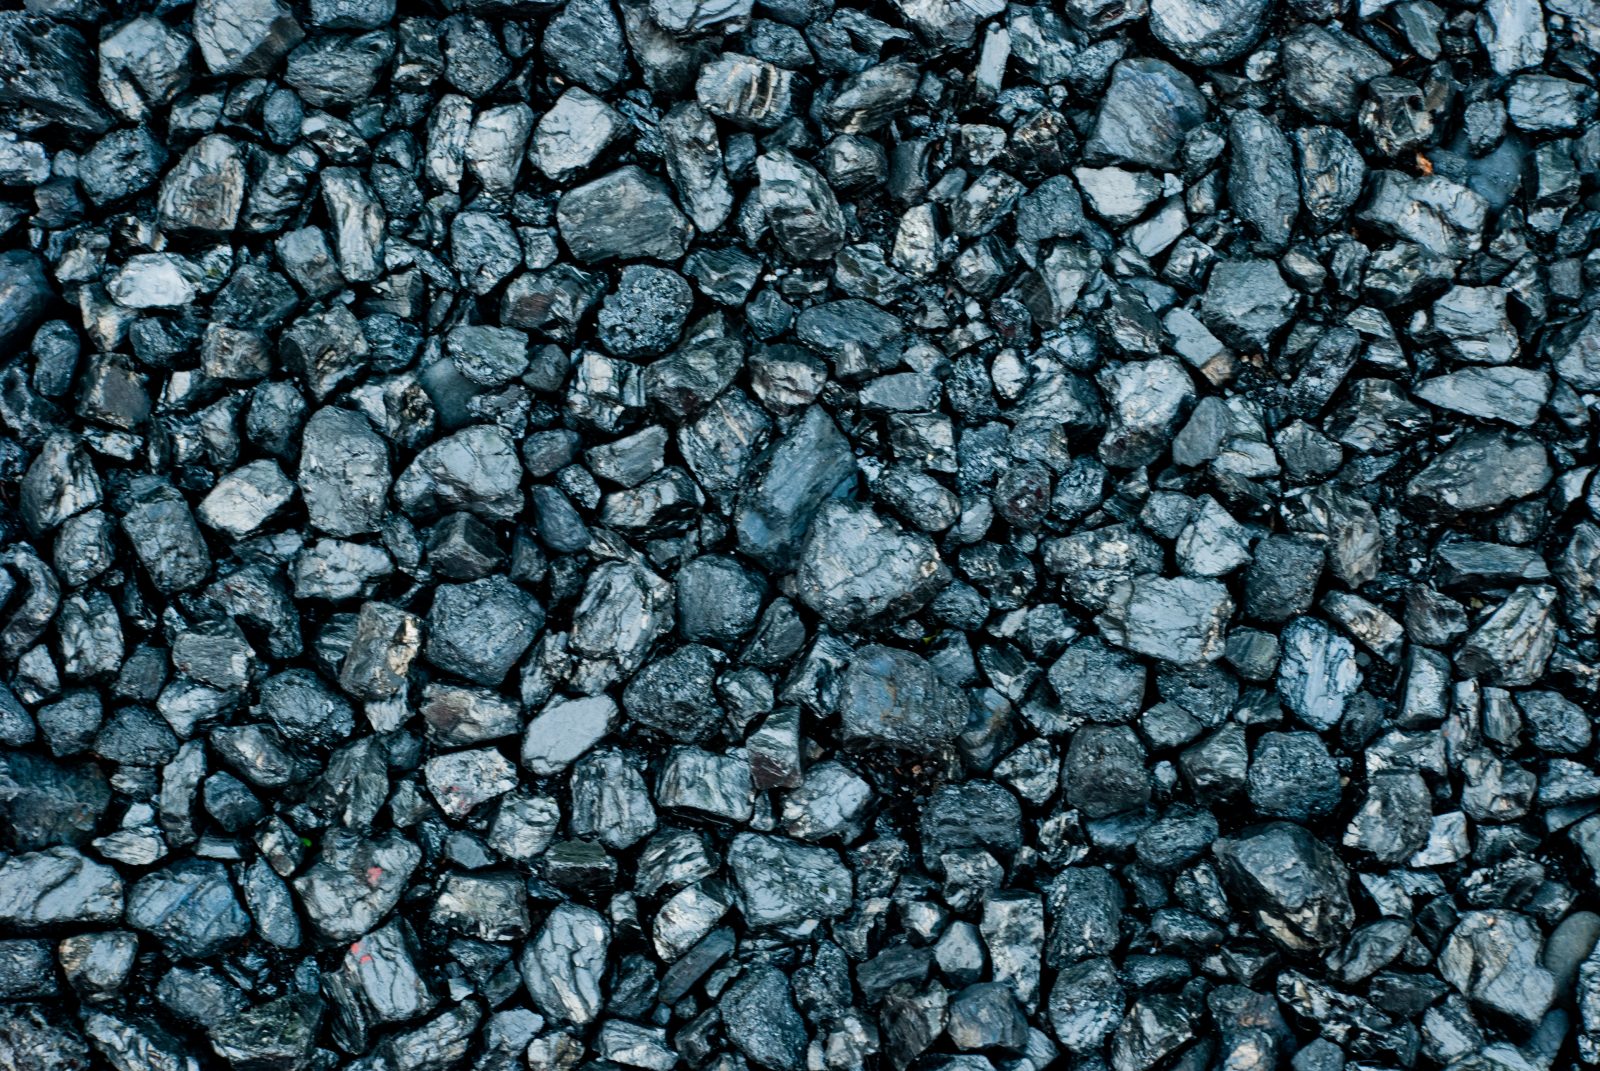 A pile of coal in a large collection.